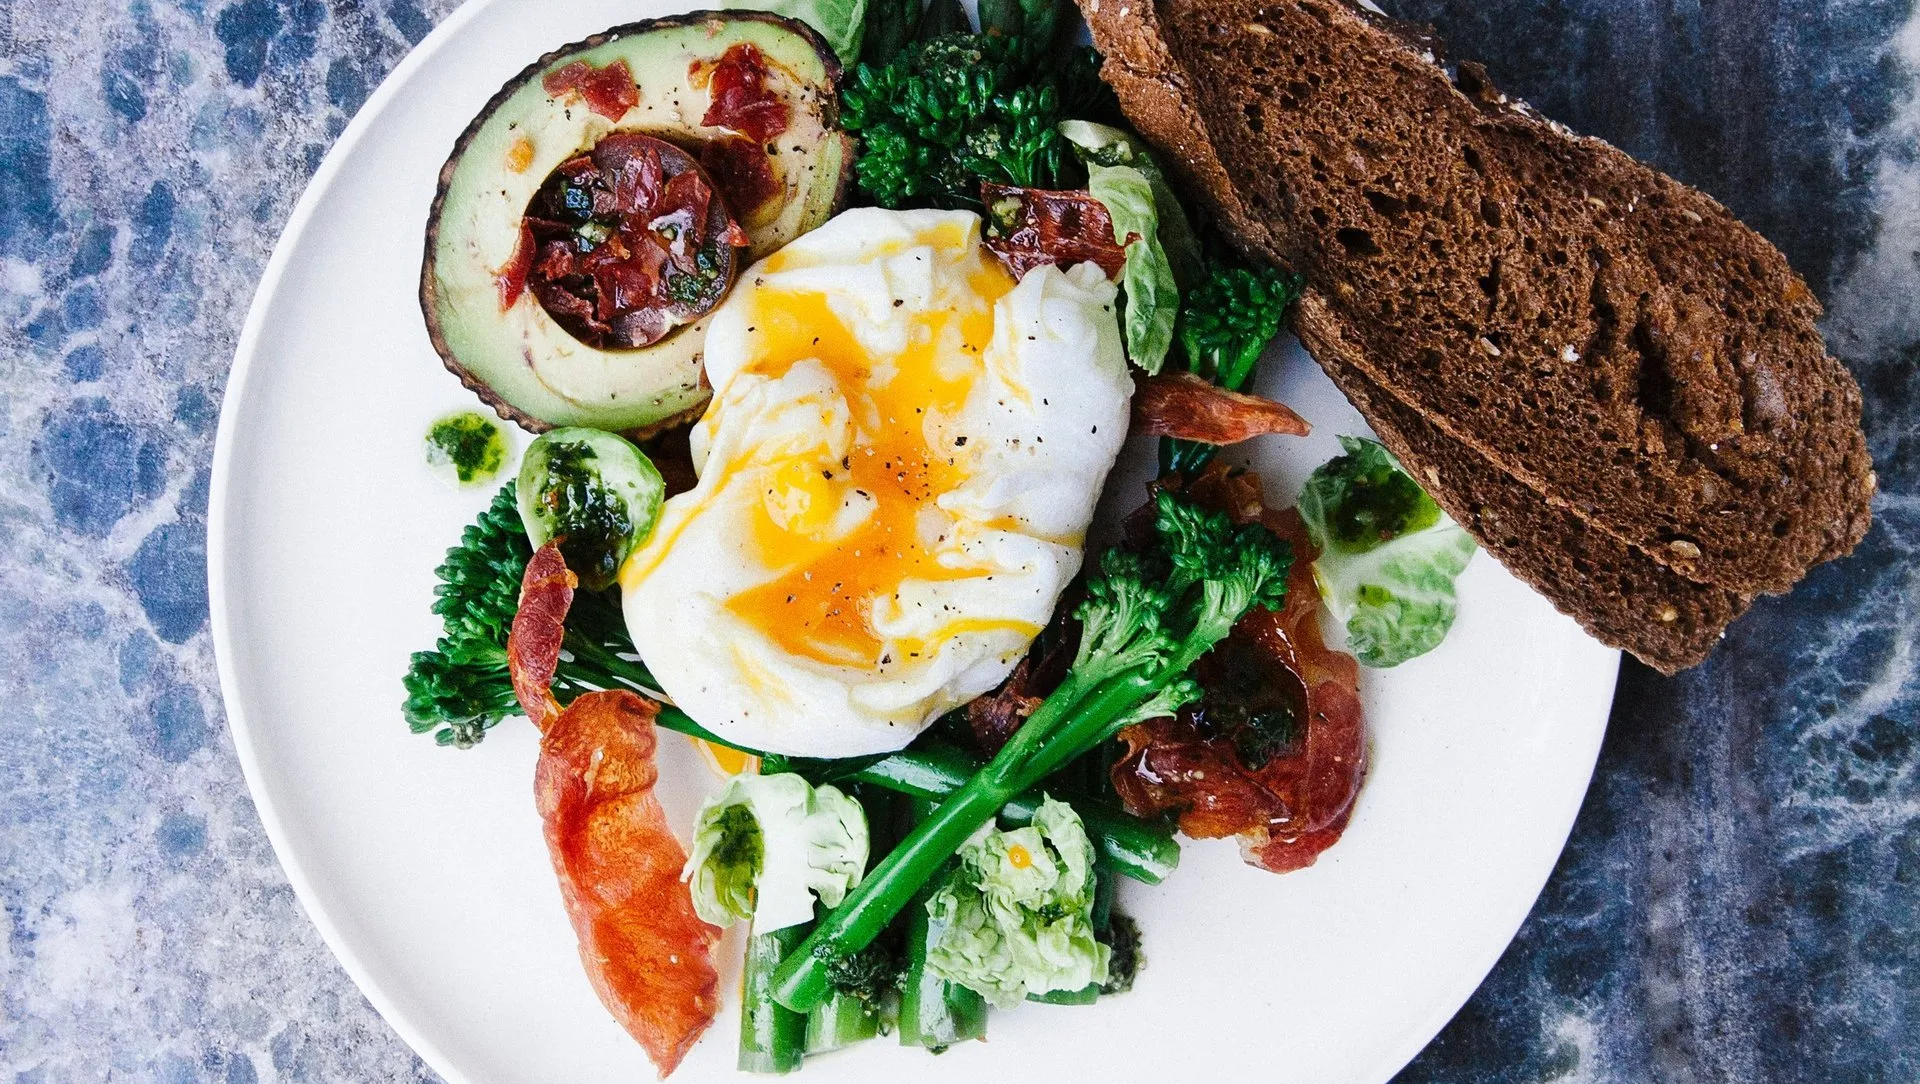 A plate of food with eggs , avocado , broccoli , bacon and bread on a table.